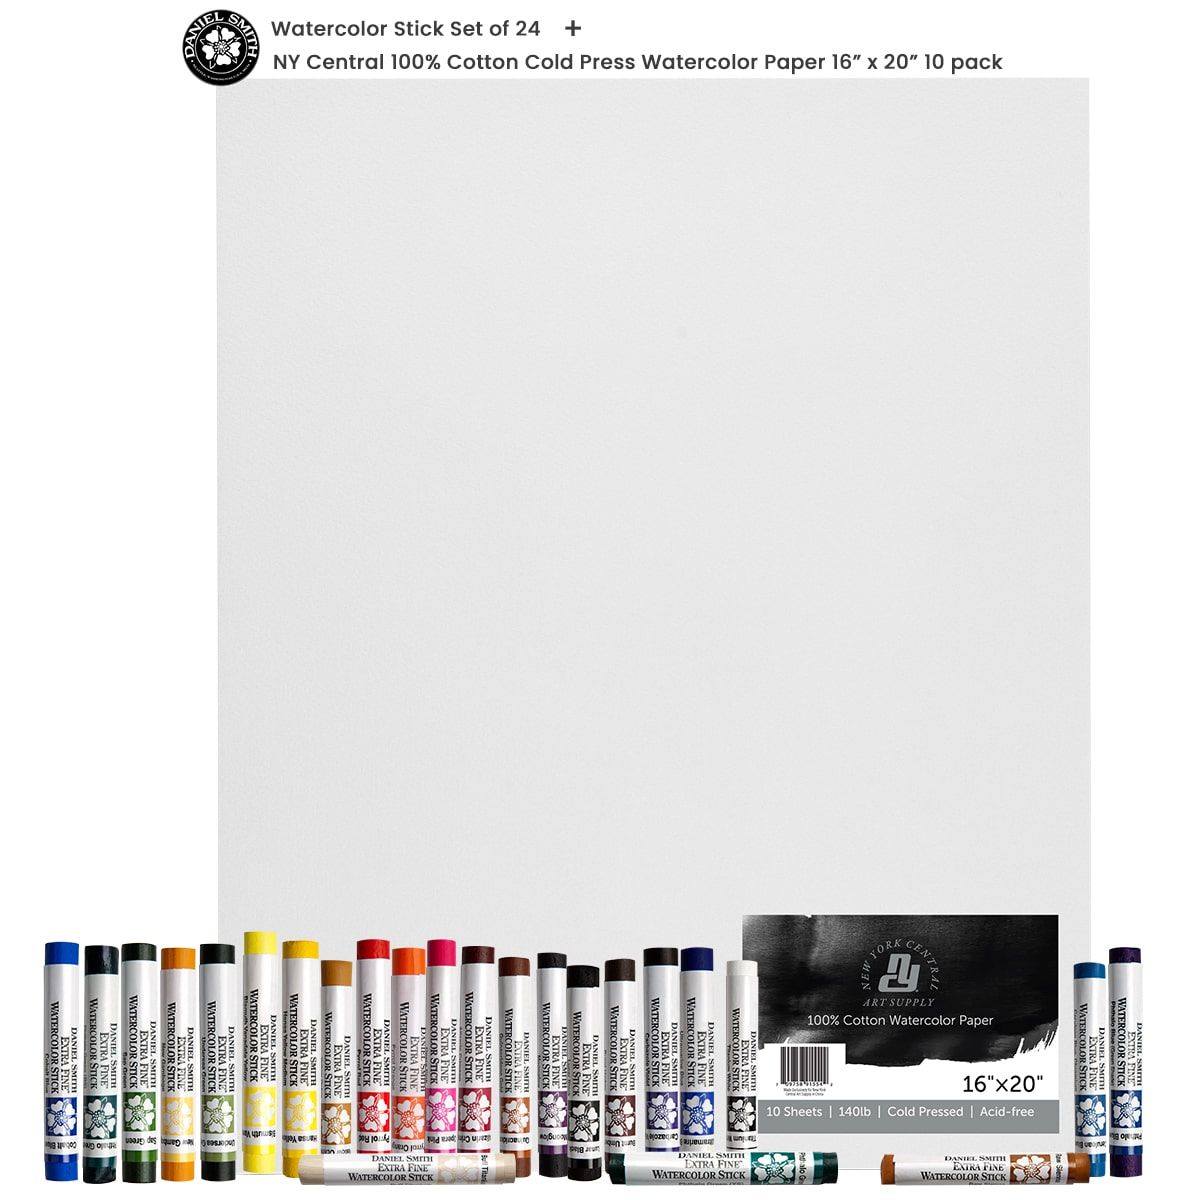 Daniel Smith Watercolor Stick Set of 24 with NY Central Cold Press Watercolor Paper Pack of 10